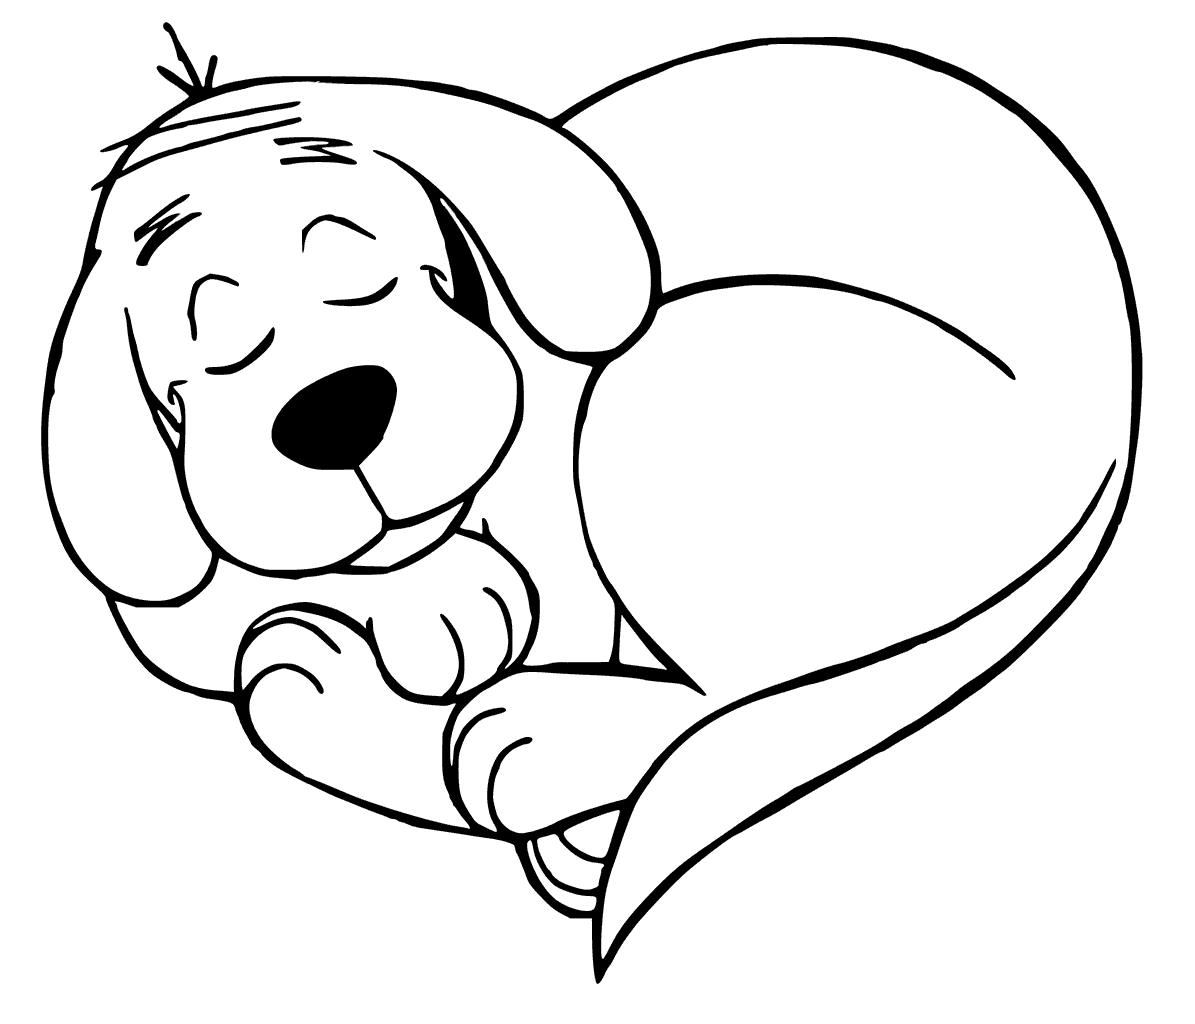 clifford the big red dog coloring pages to print